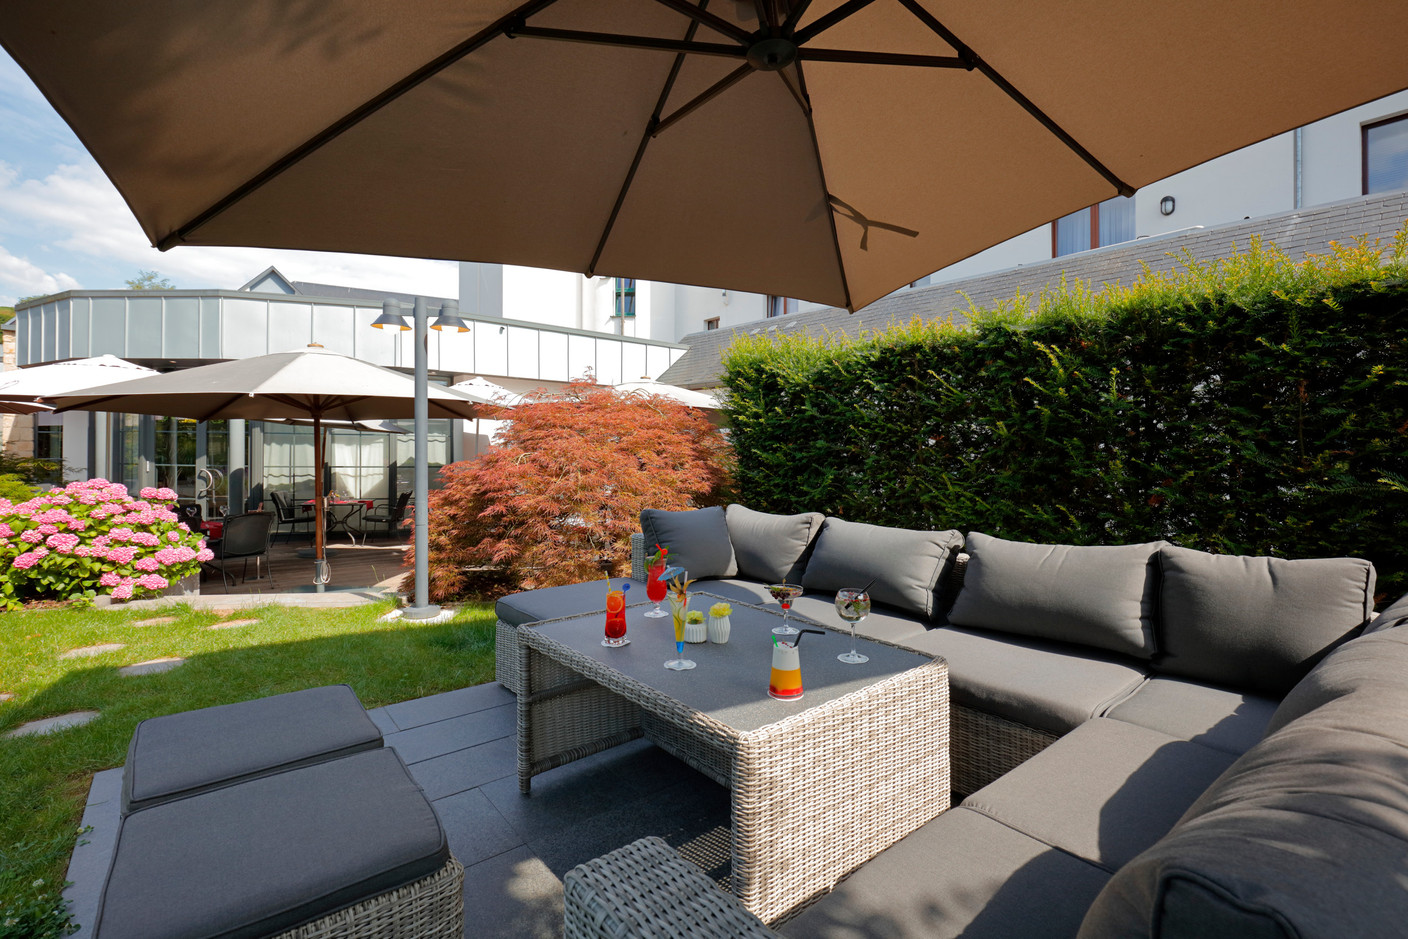 When the weather is fine, we'll rush to the shady terrace in the quiet of a flower garden. Maison Moderne